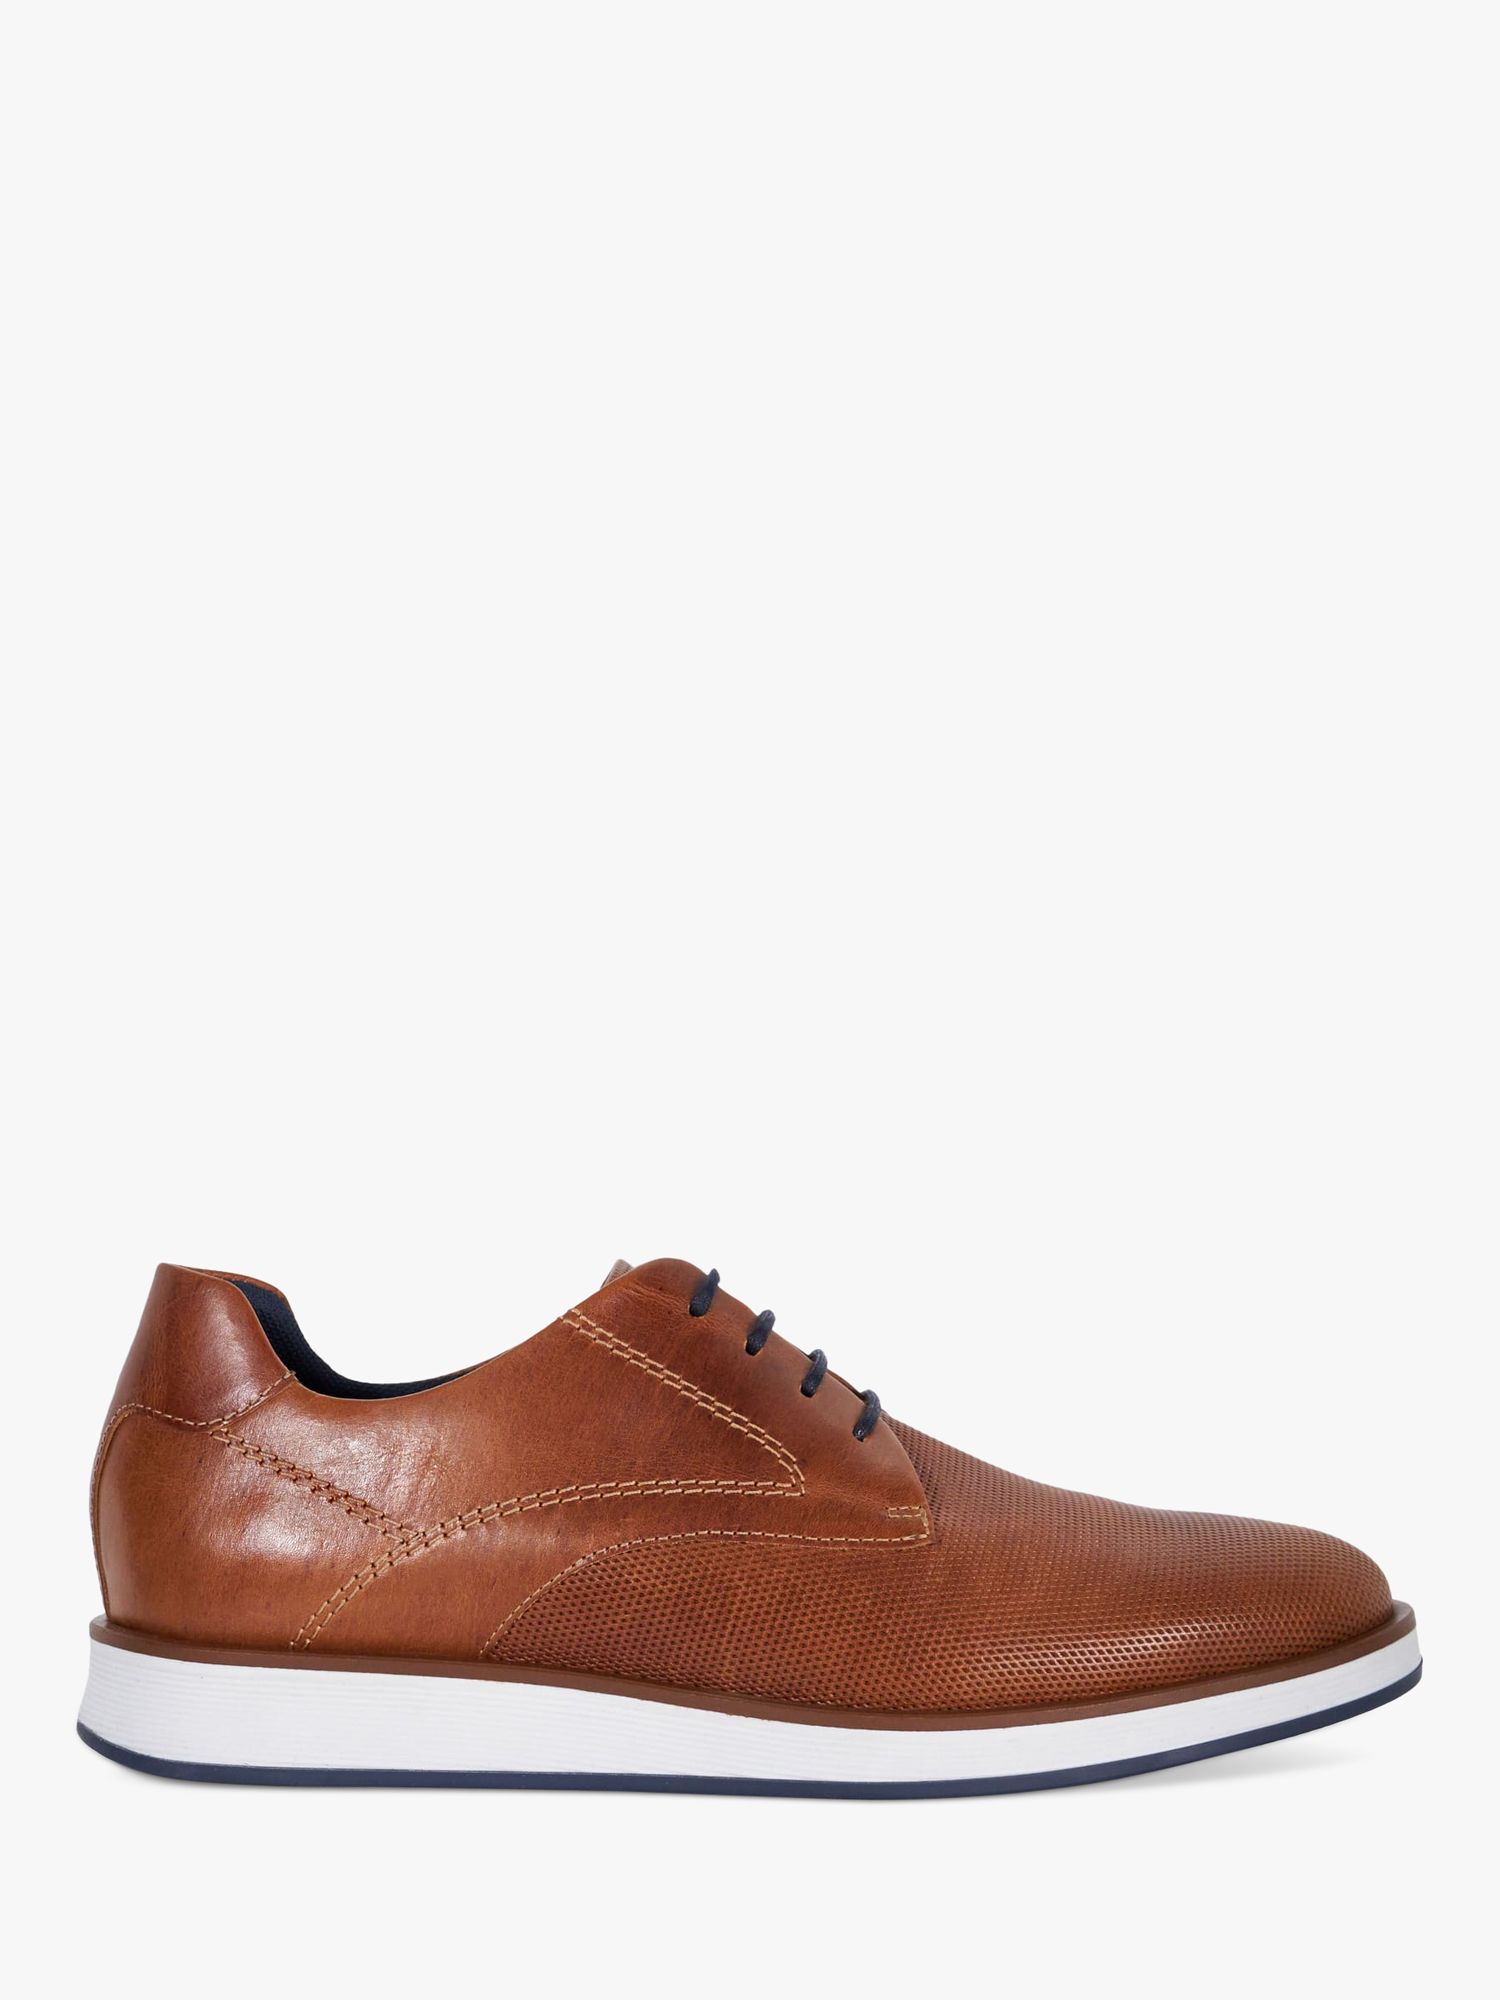 Dune Beko Perforated Leather Gibson Shoes, Tan, 6